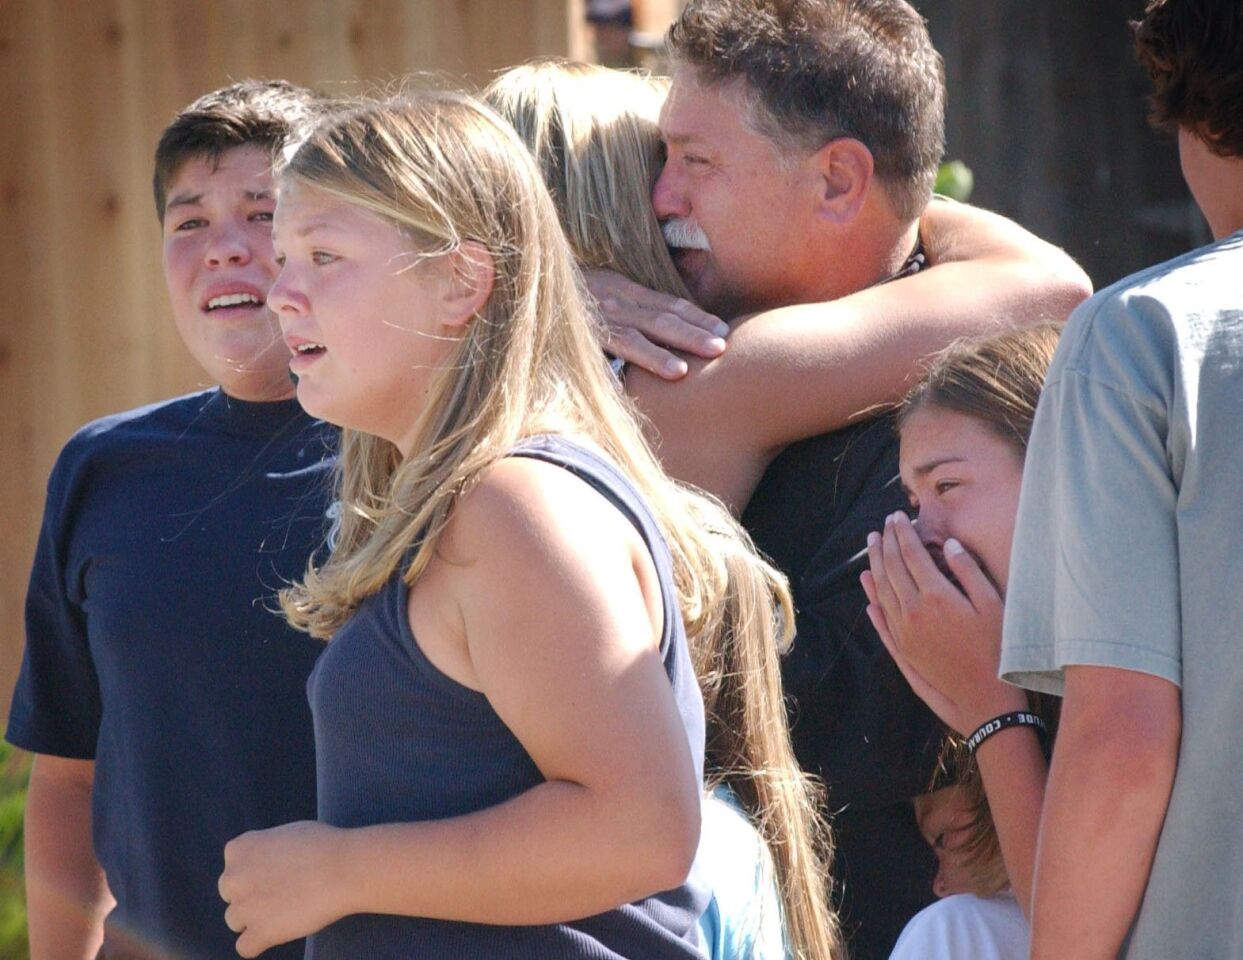 Brian Wofford, rejoices with his children on June 30, 2004, after arriving at their Encinitas home following a surprise weeklong remodel that quadrupled their house in size on the ABC television series "Extreme Makever: Home Edition."